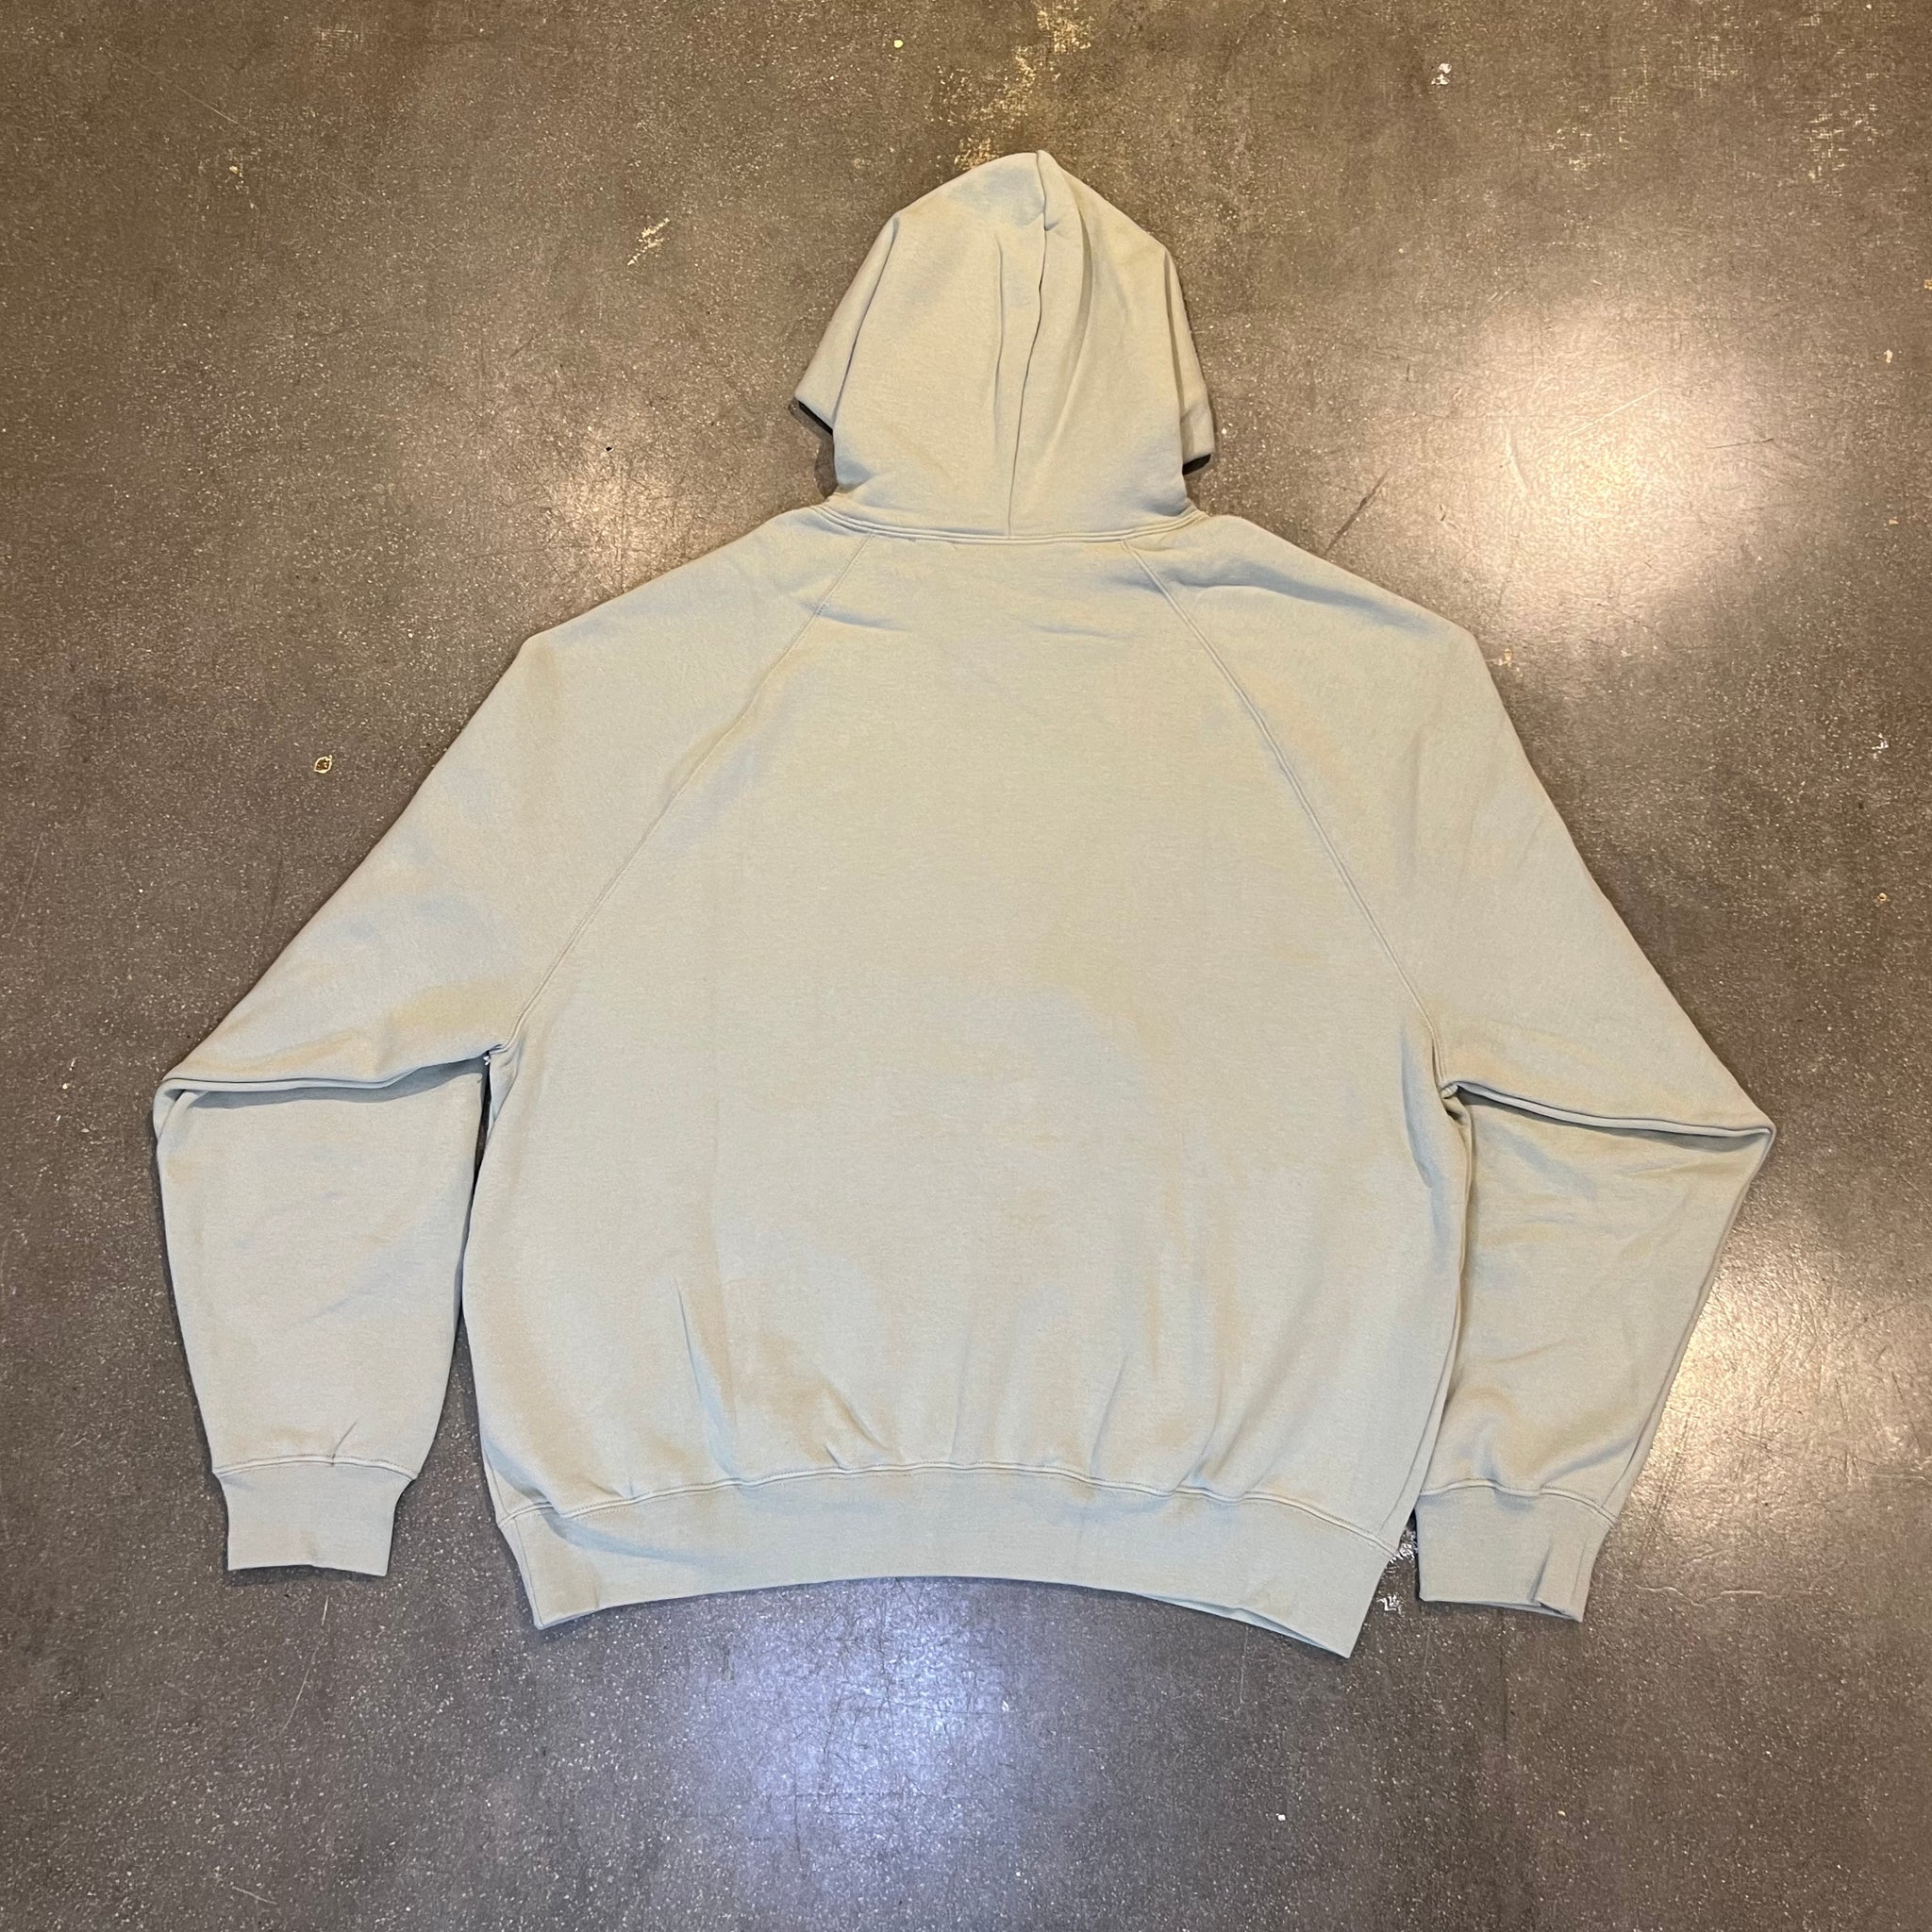 Fear of God Essentials Hoodie Seafoam – FABULOUS CONSIGNMENT STORE